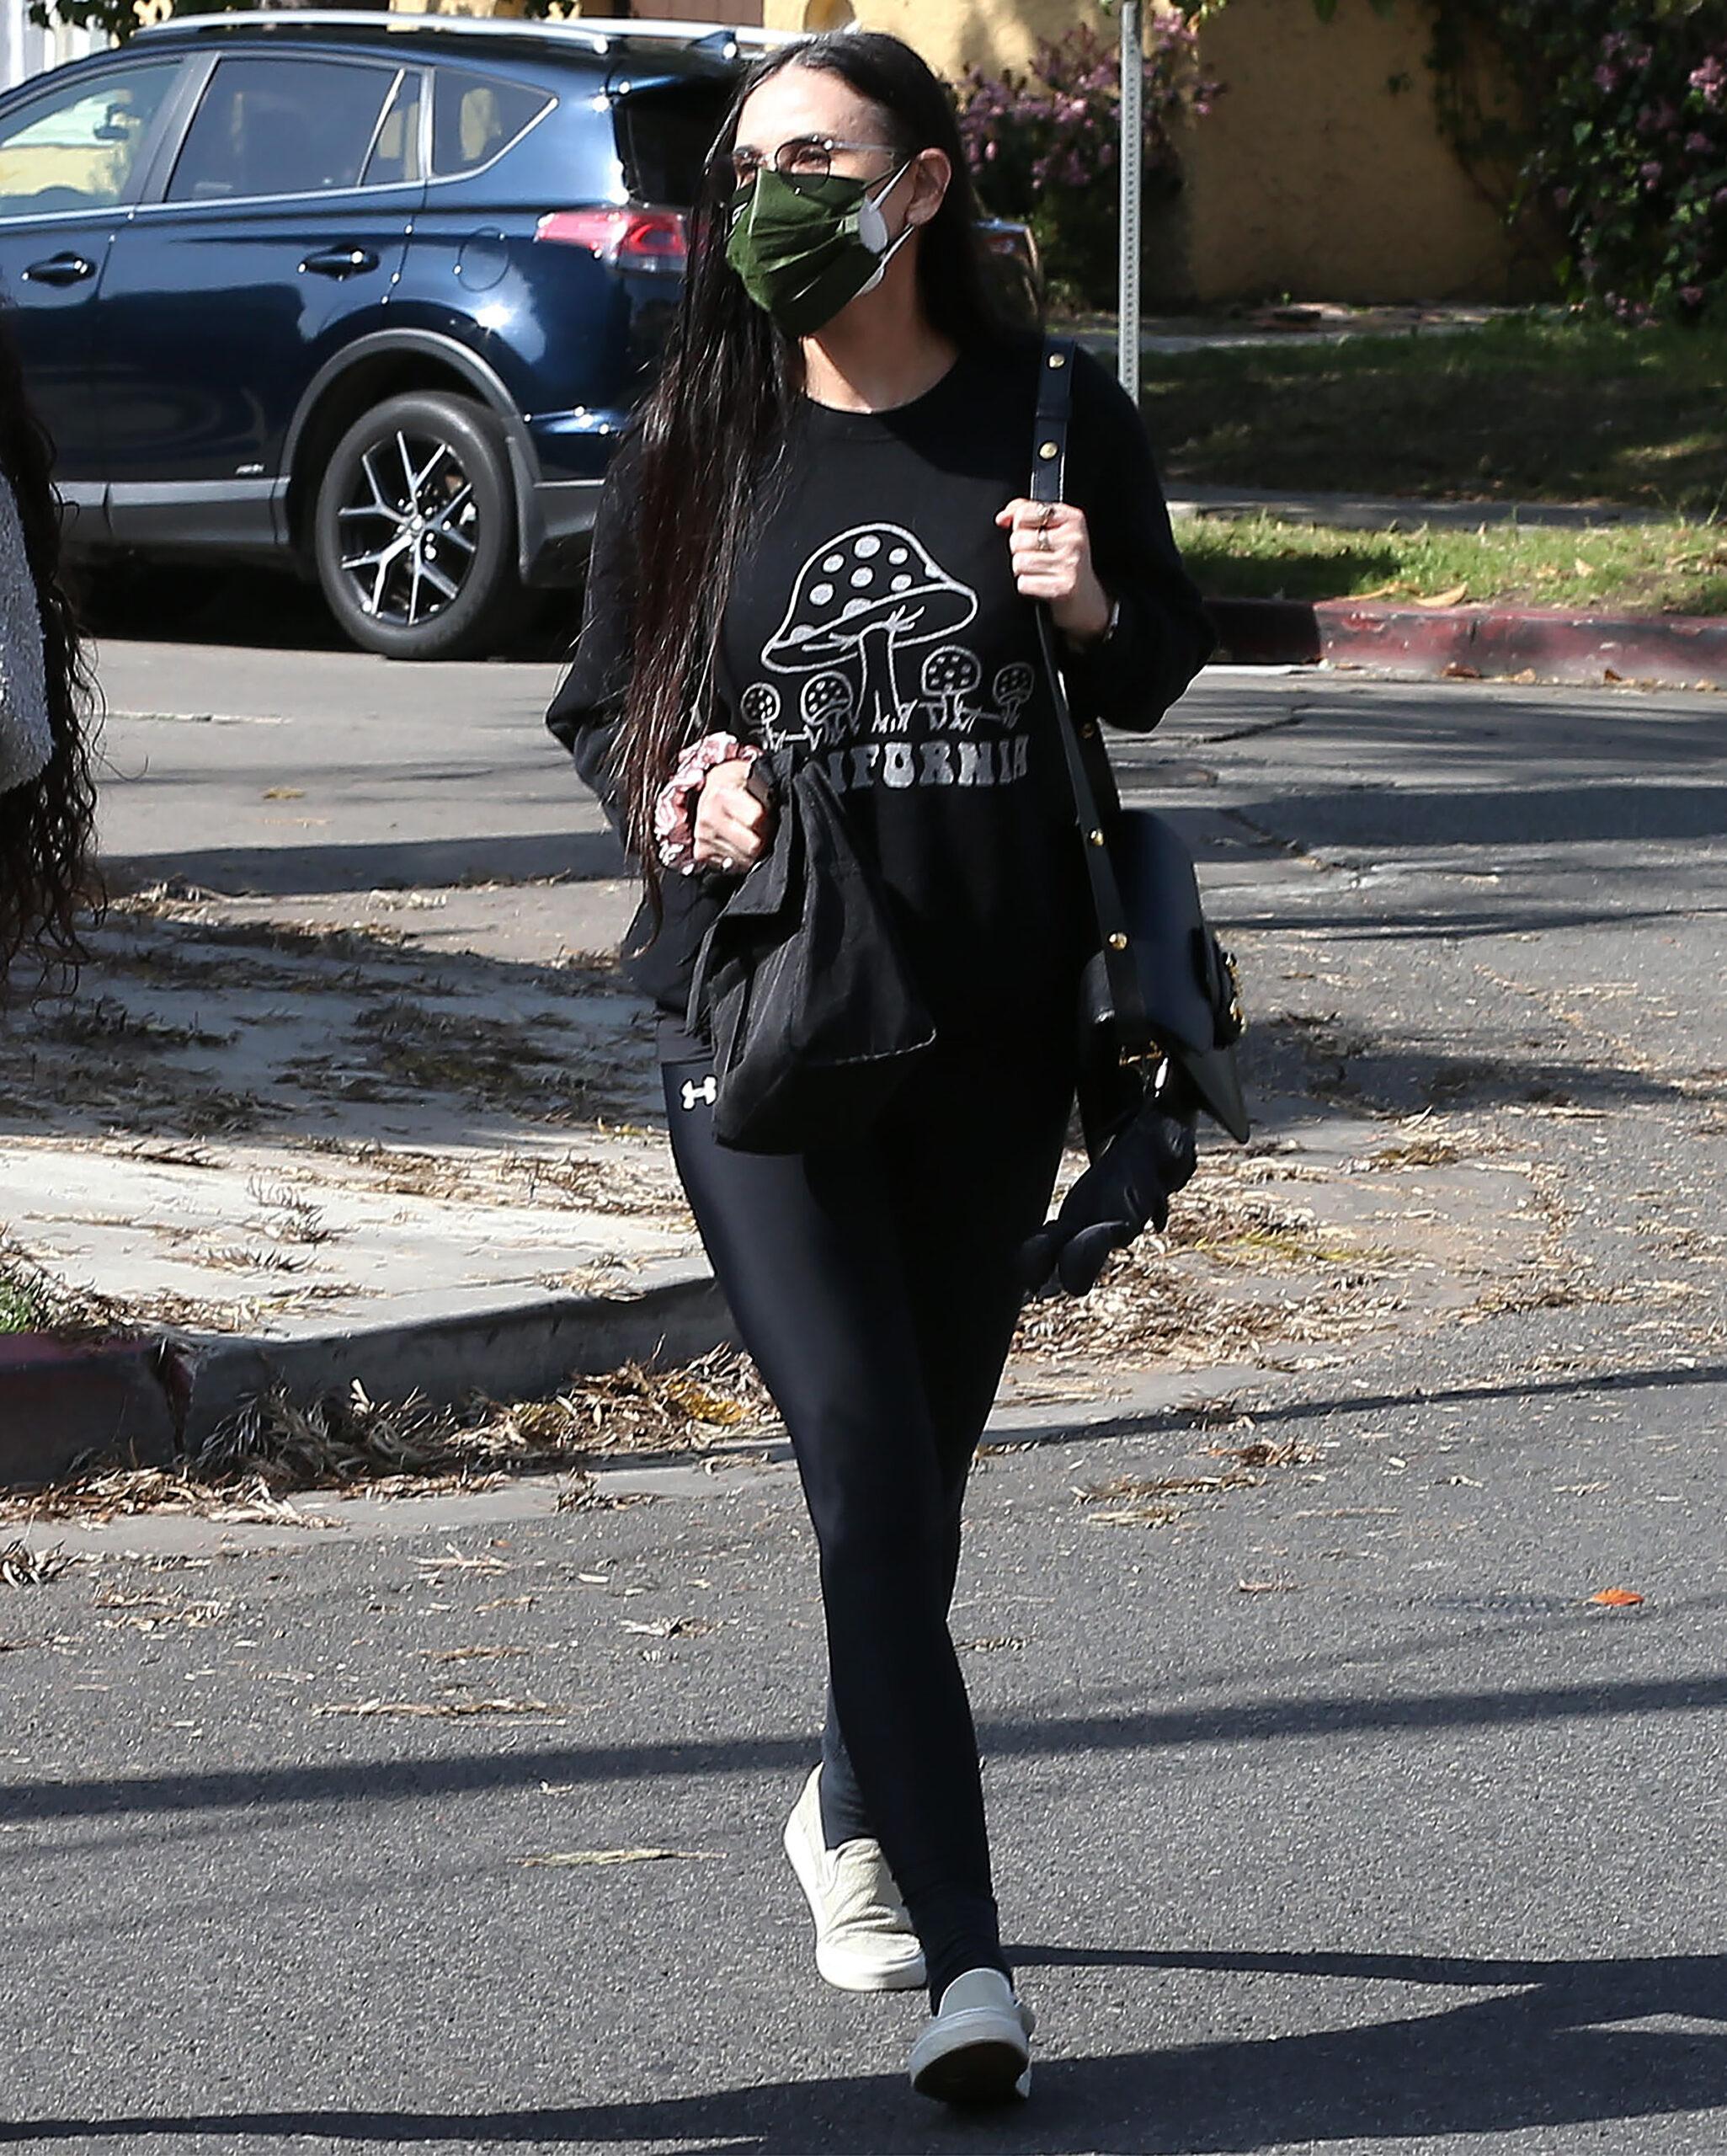 Rumer Willis and Demi Moore leaving pilates classes together in West Hollywood